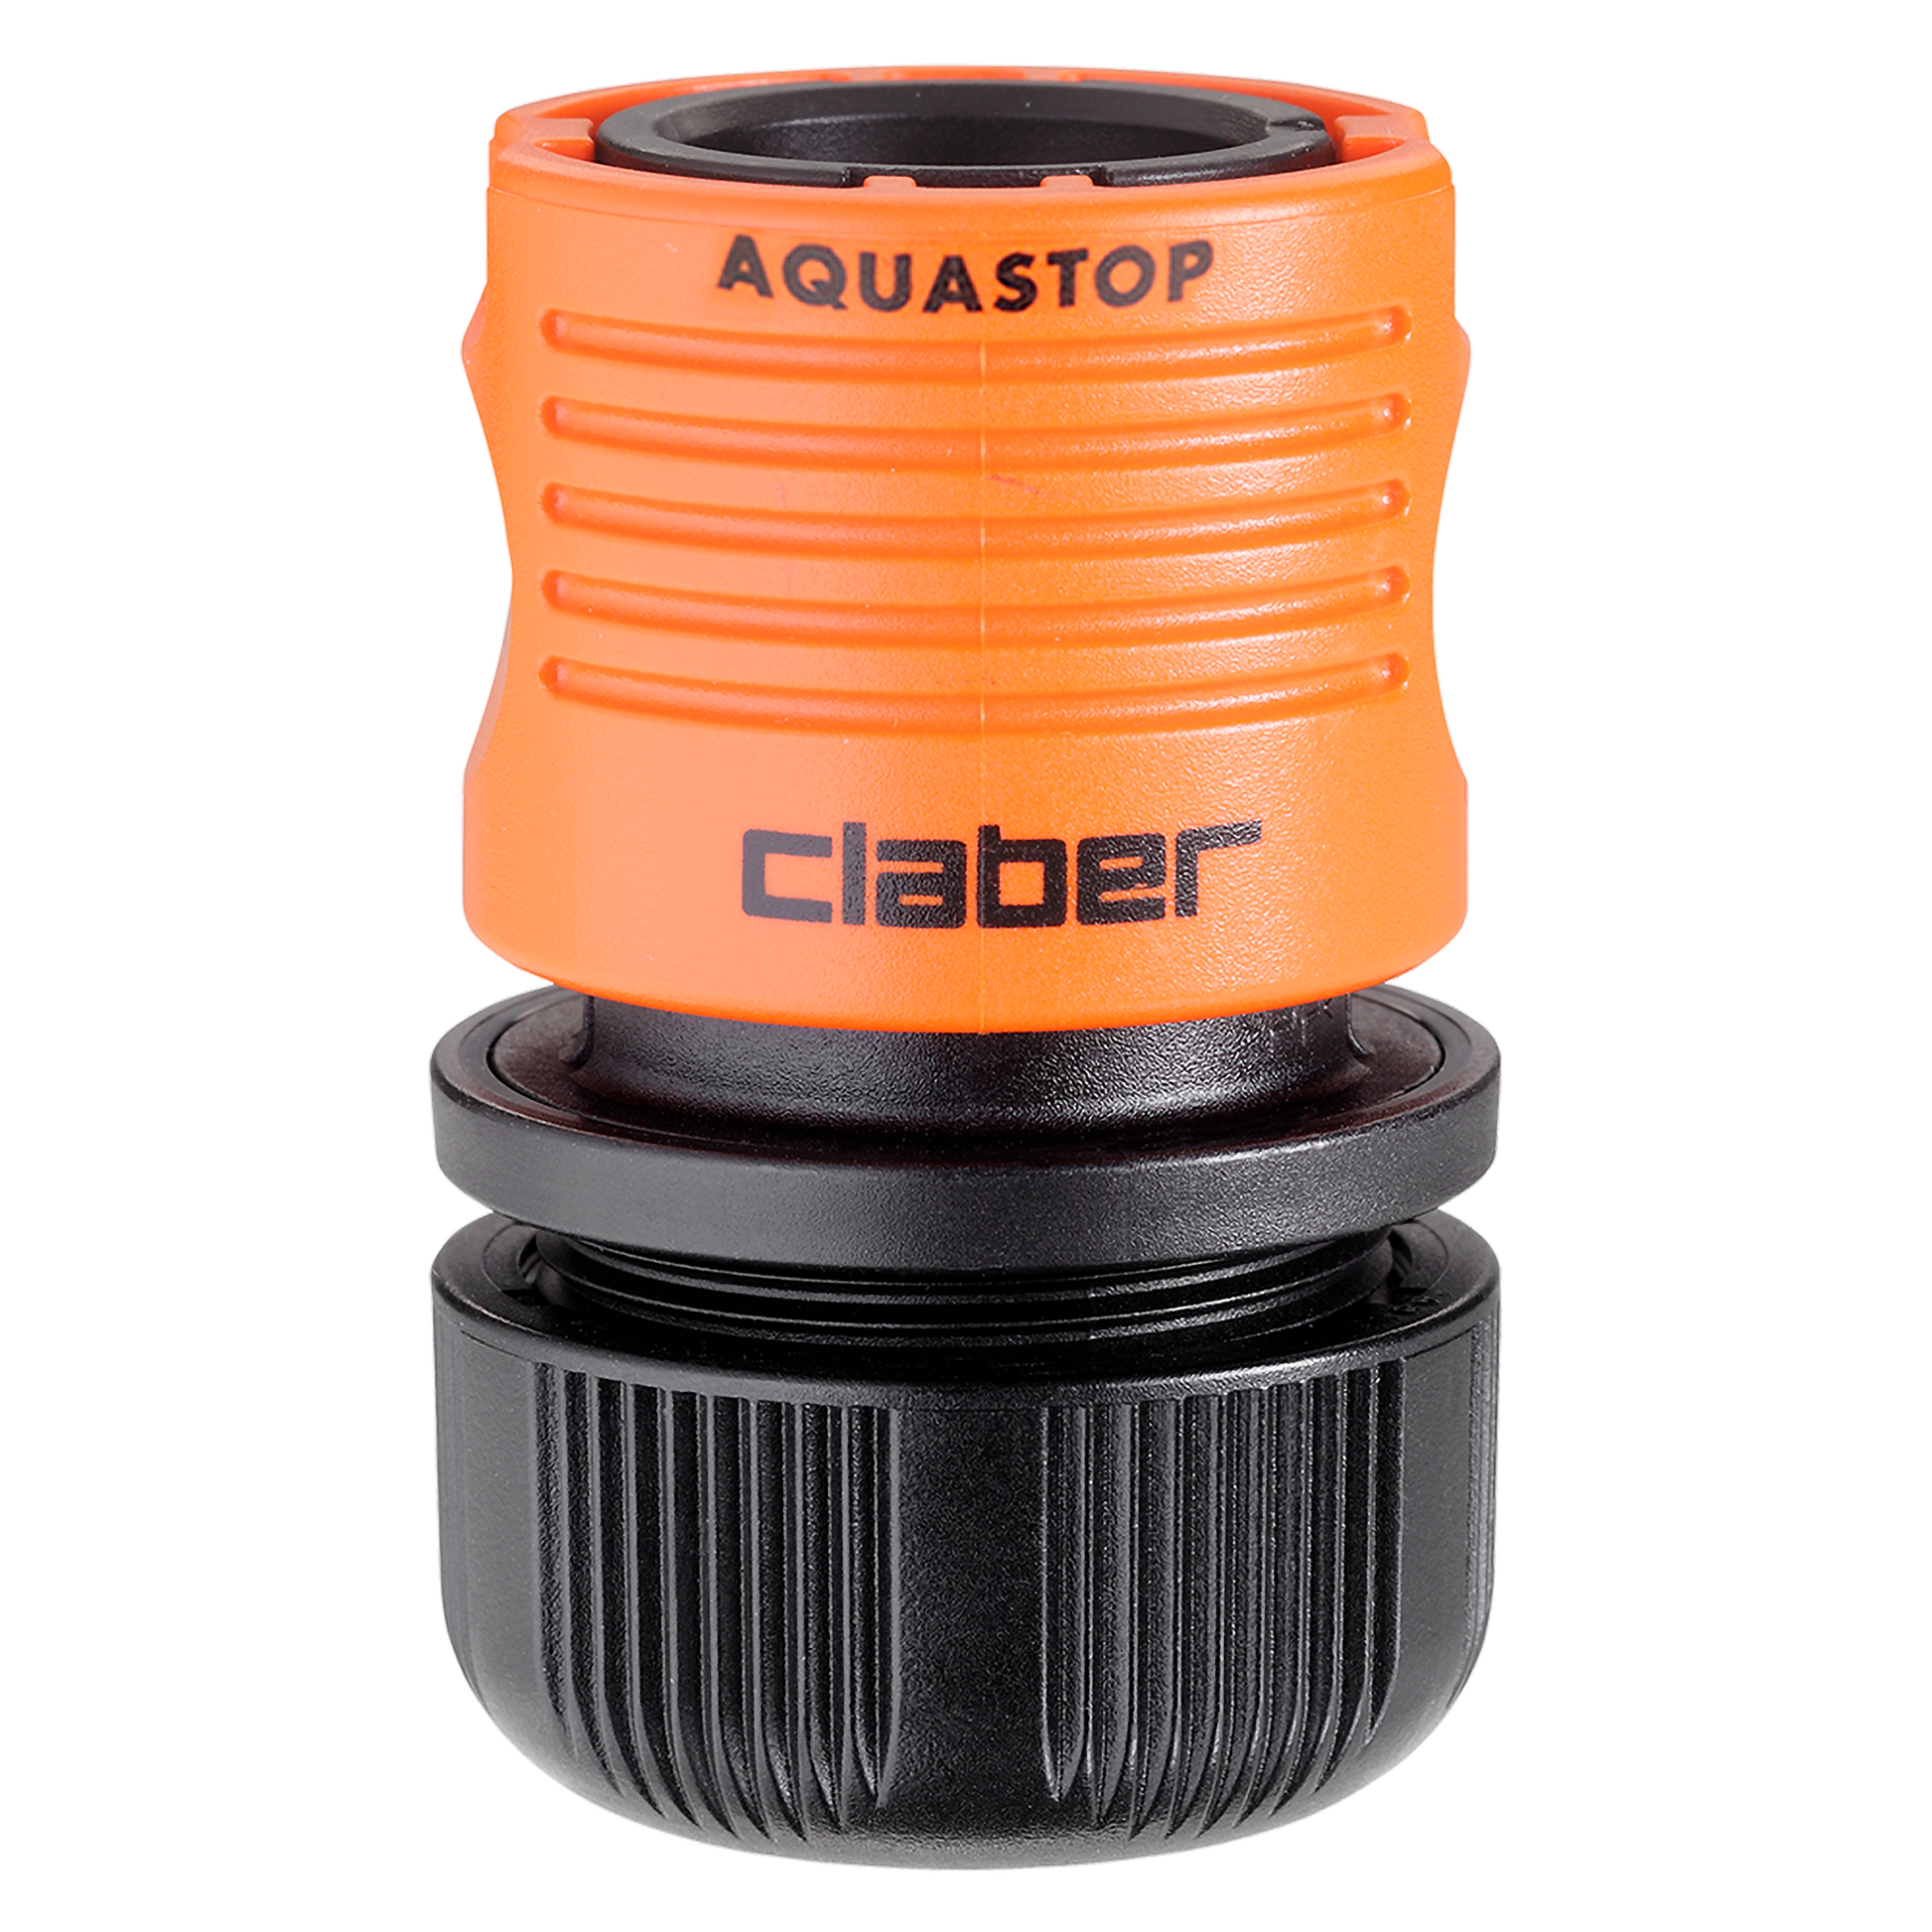 CLABER 3/4" Garden Hose Pipe Click Connector With Aquastop - Premium gardening from CLABER - Just R 85! Shop now at Securadeal